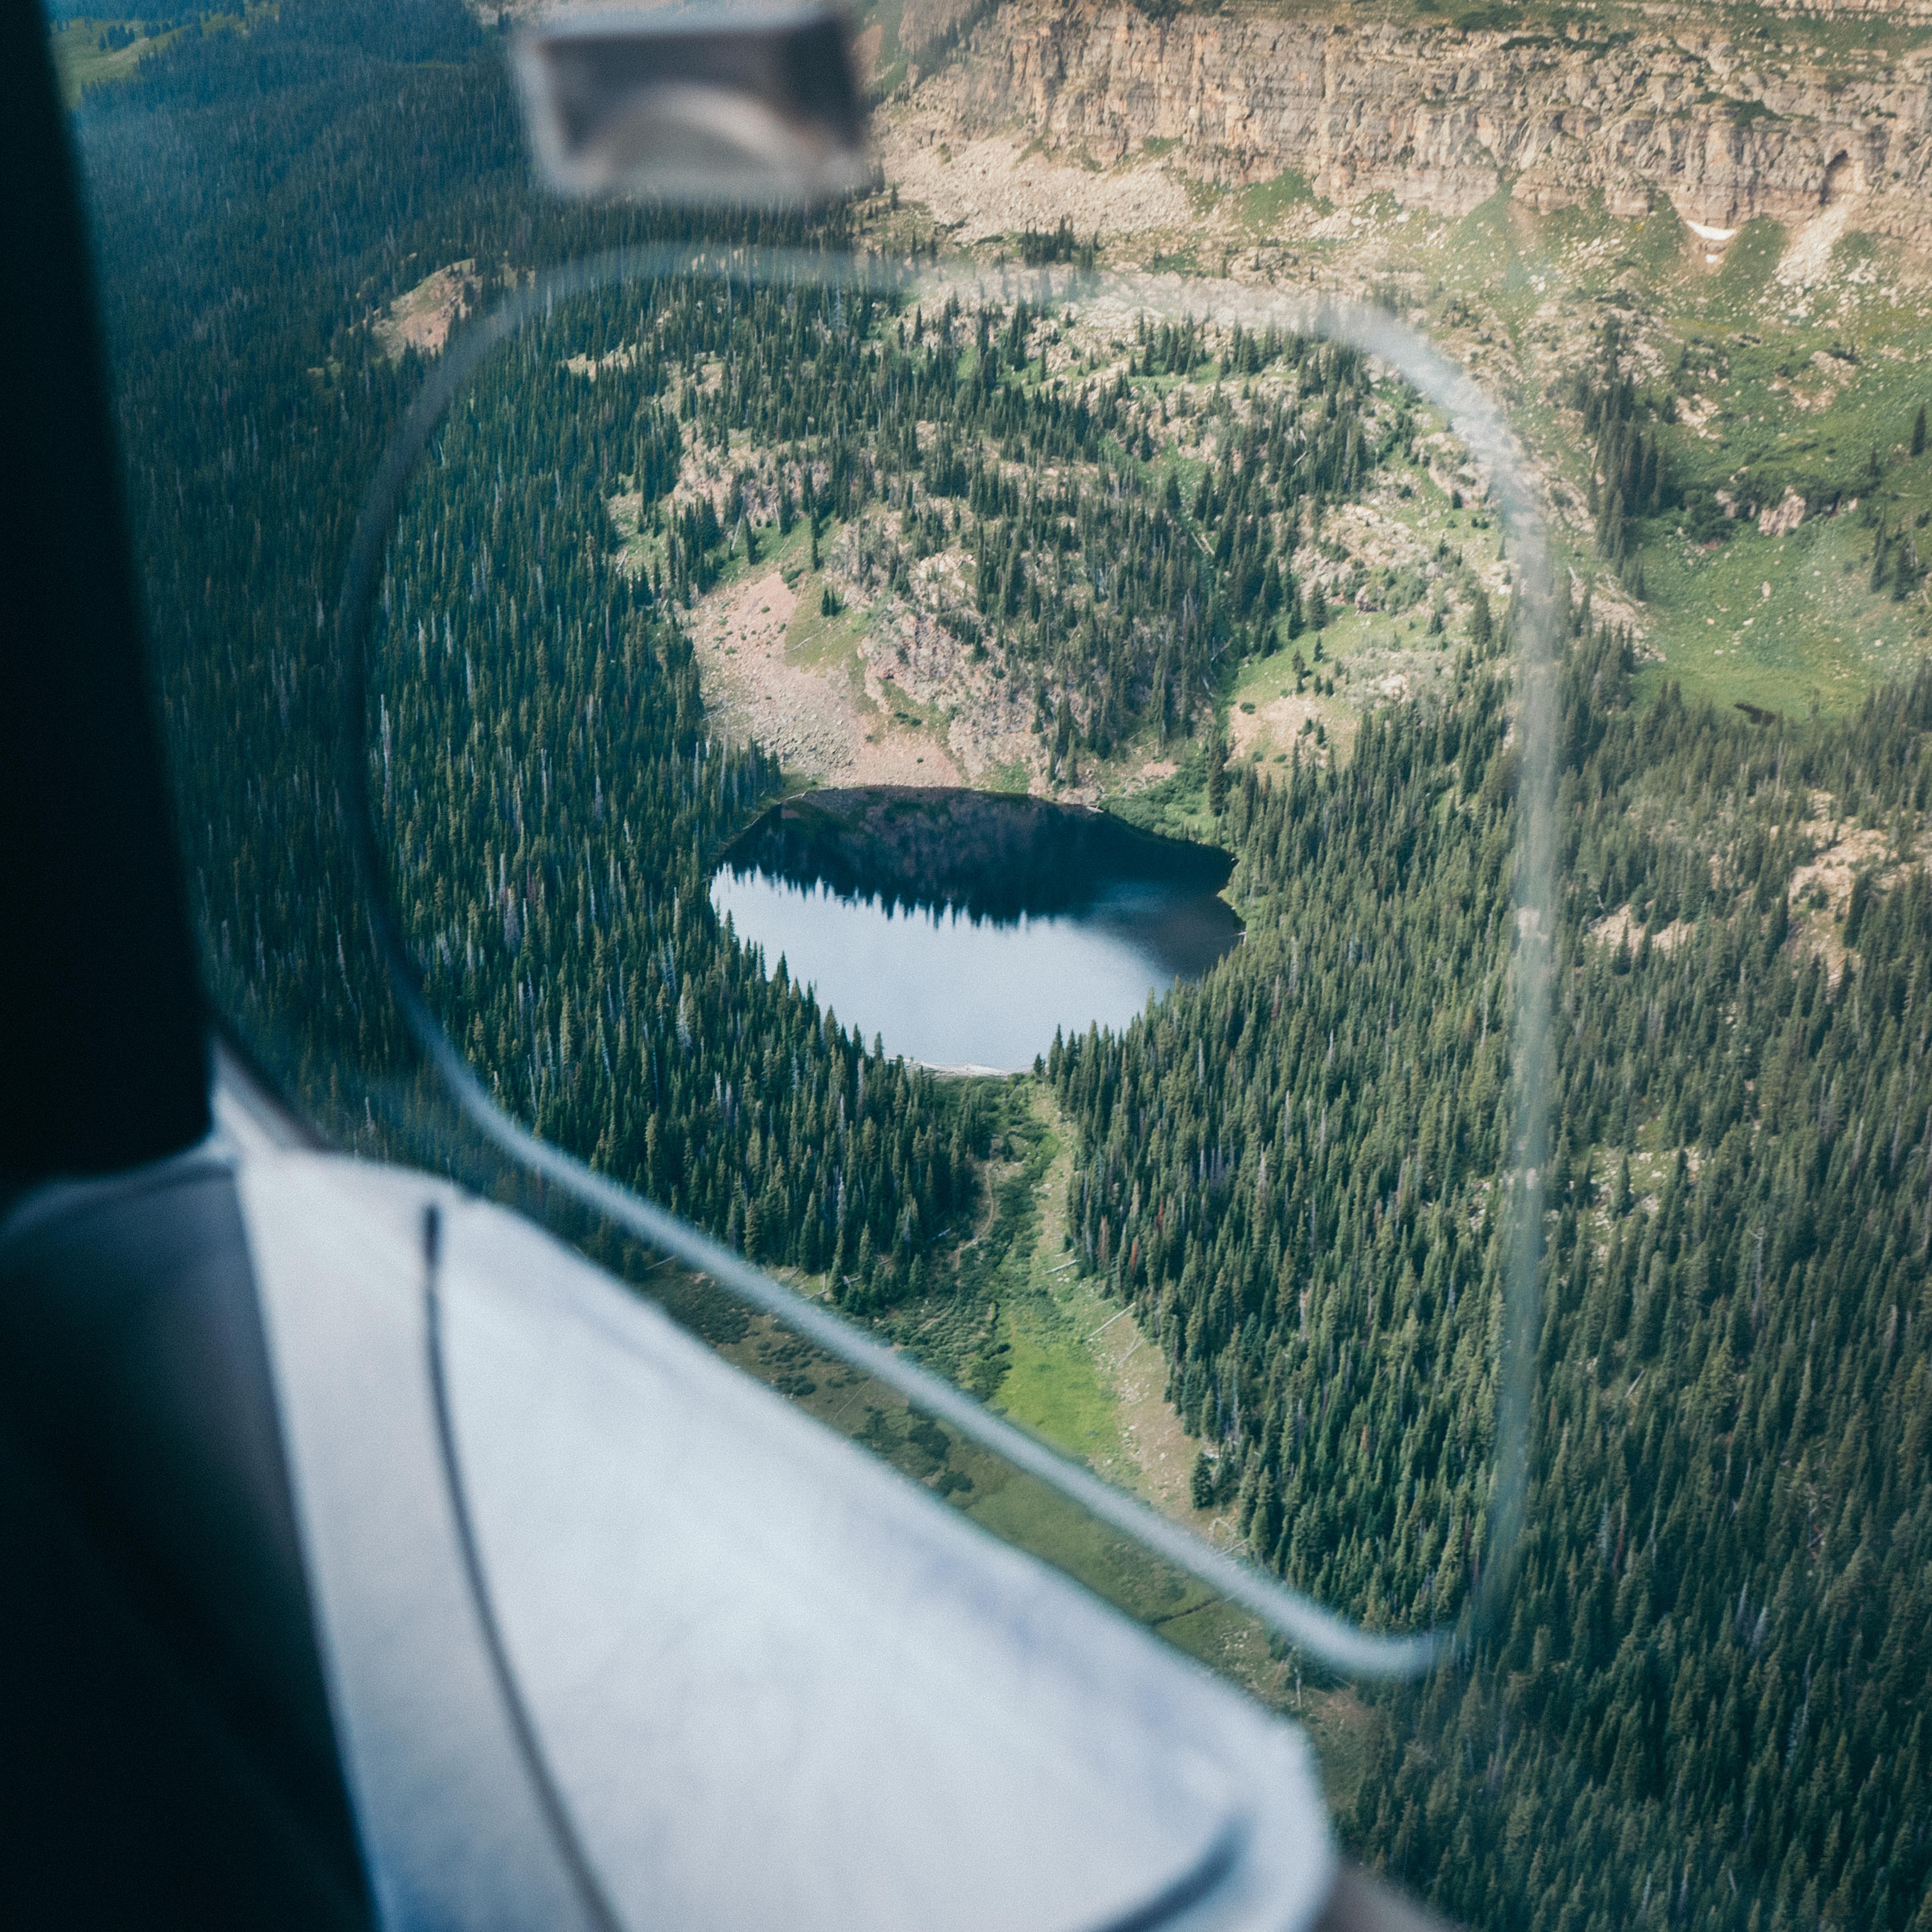 aircraft window view photography of body of water surround bed forest trees during daytime